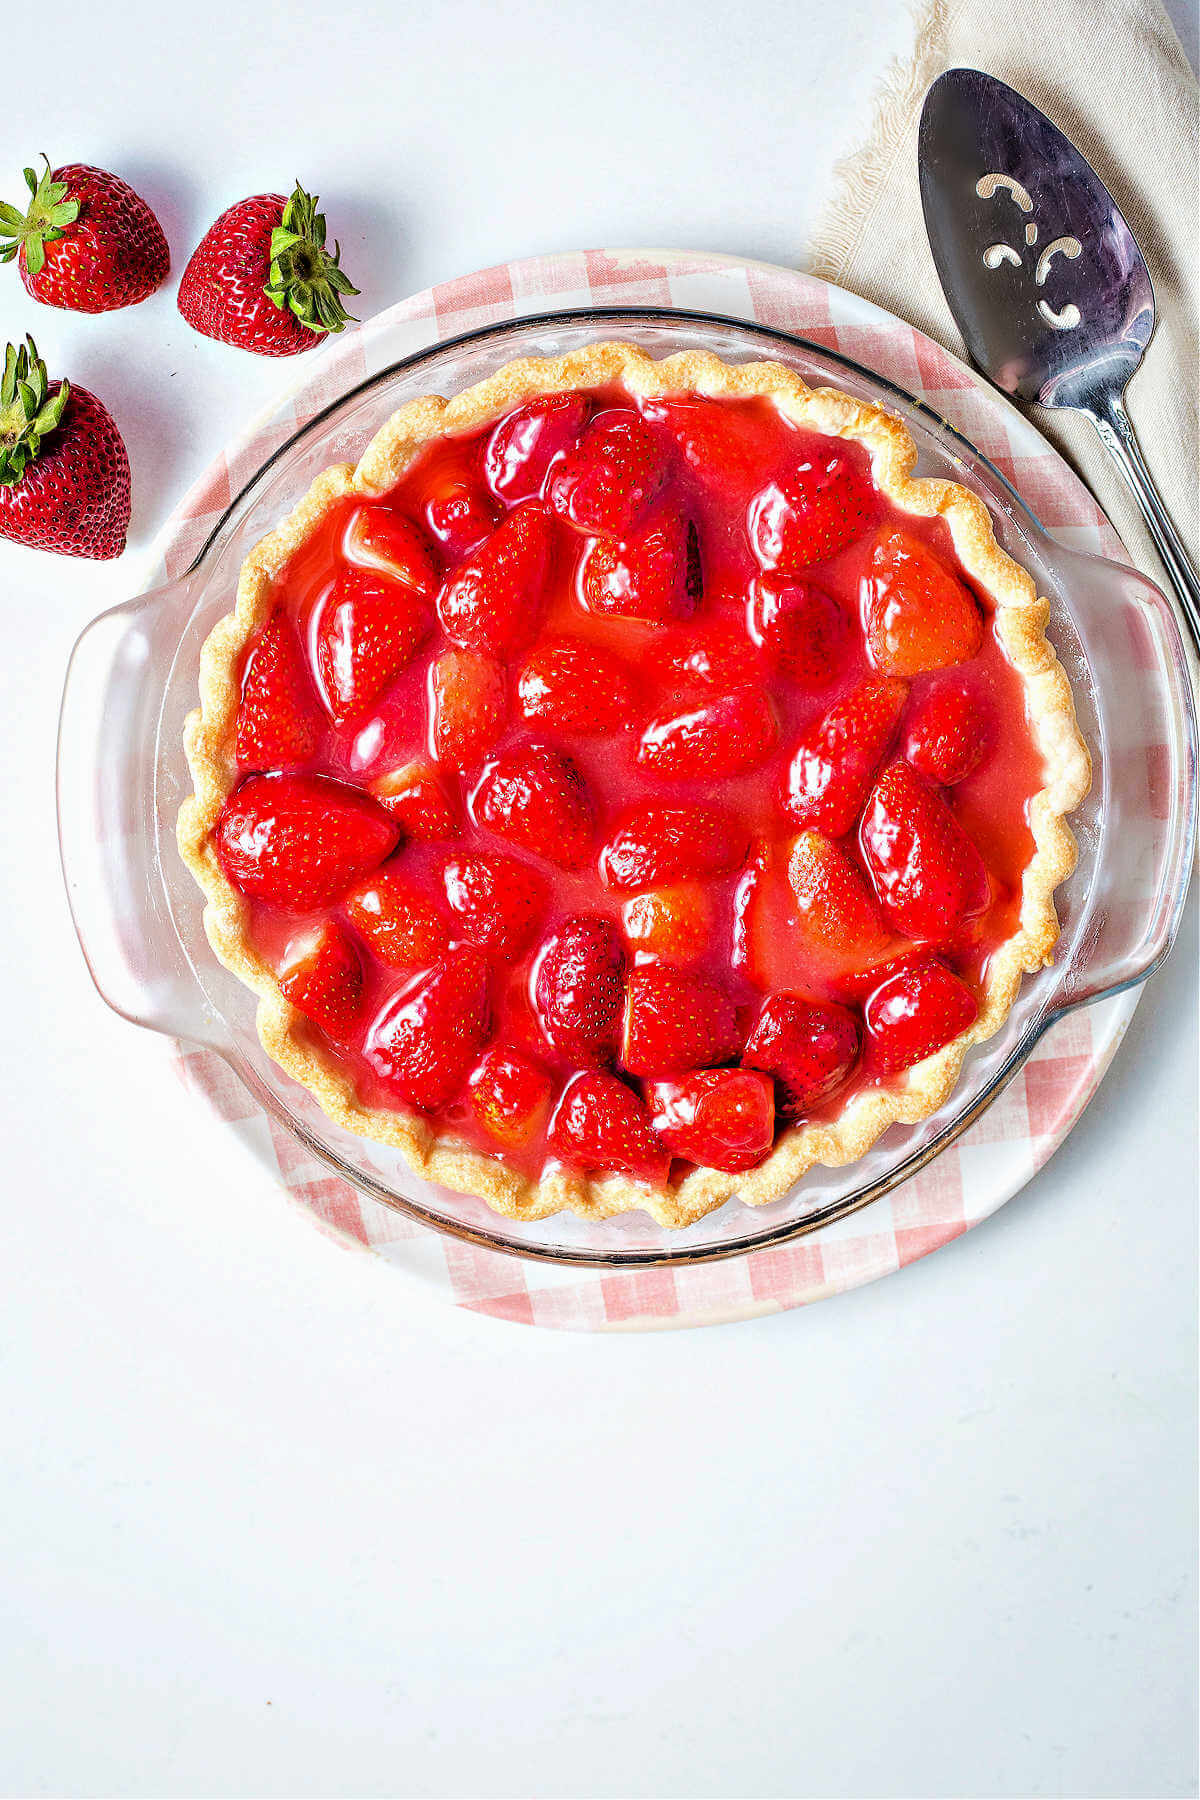 a baked fresh strawberry pie sitting on a pink plate with a pie server and strawberries scattered on a table.